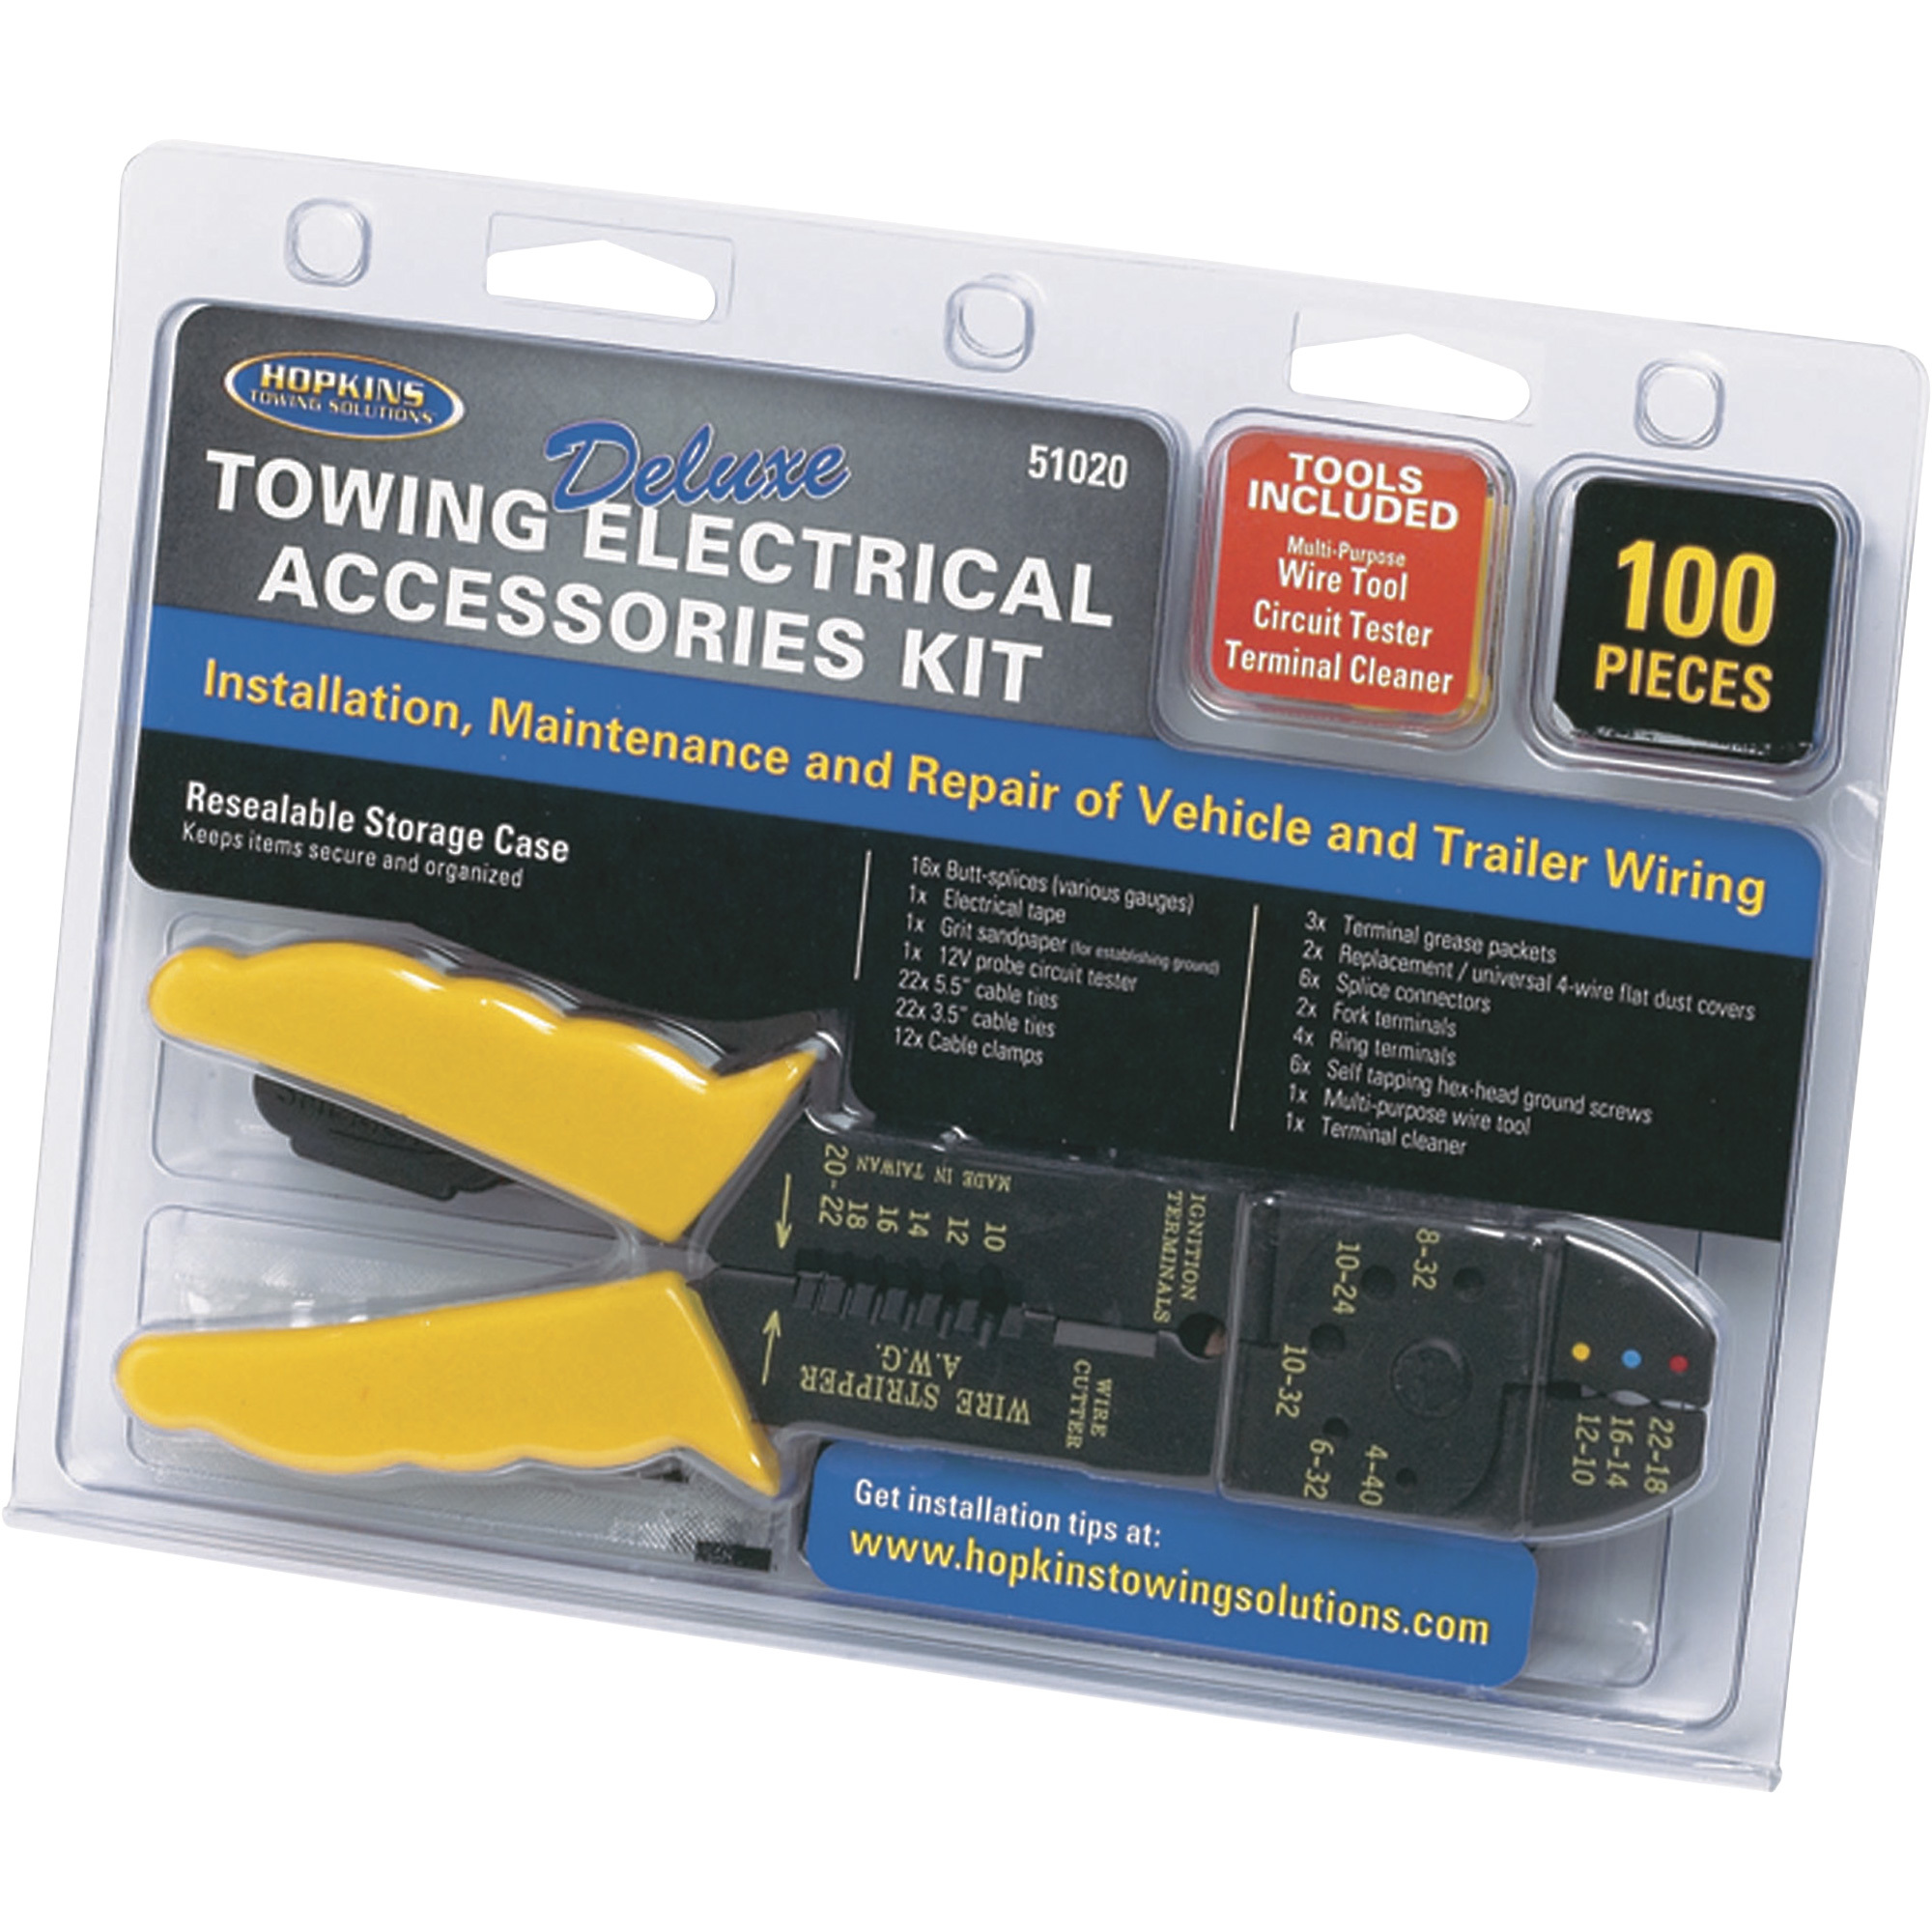 Hopkins Towing Solutions Deluxe Trailer Wiring Installation Kit â 100-Piece Set, Model 51020